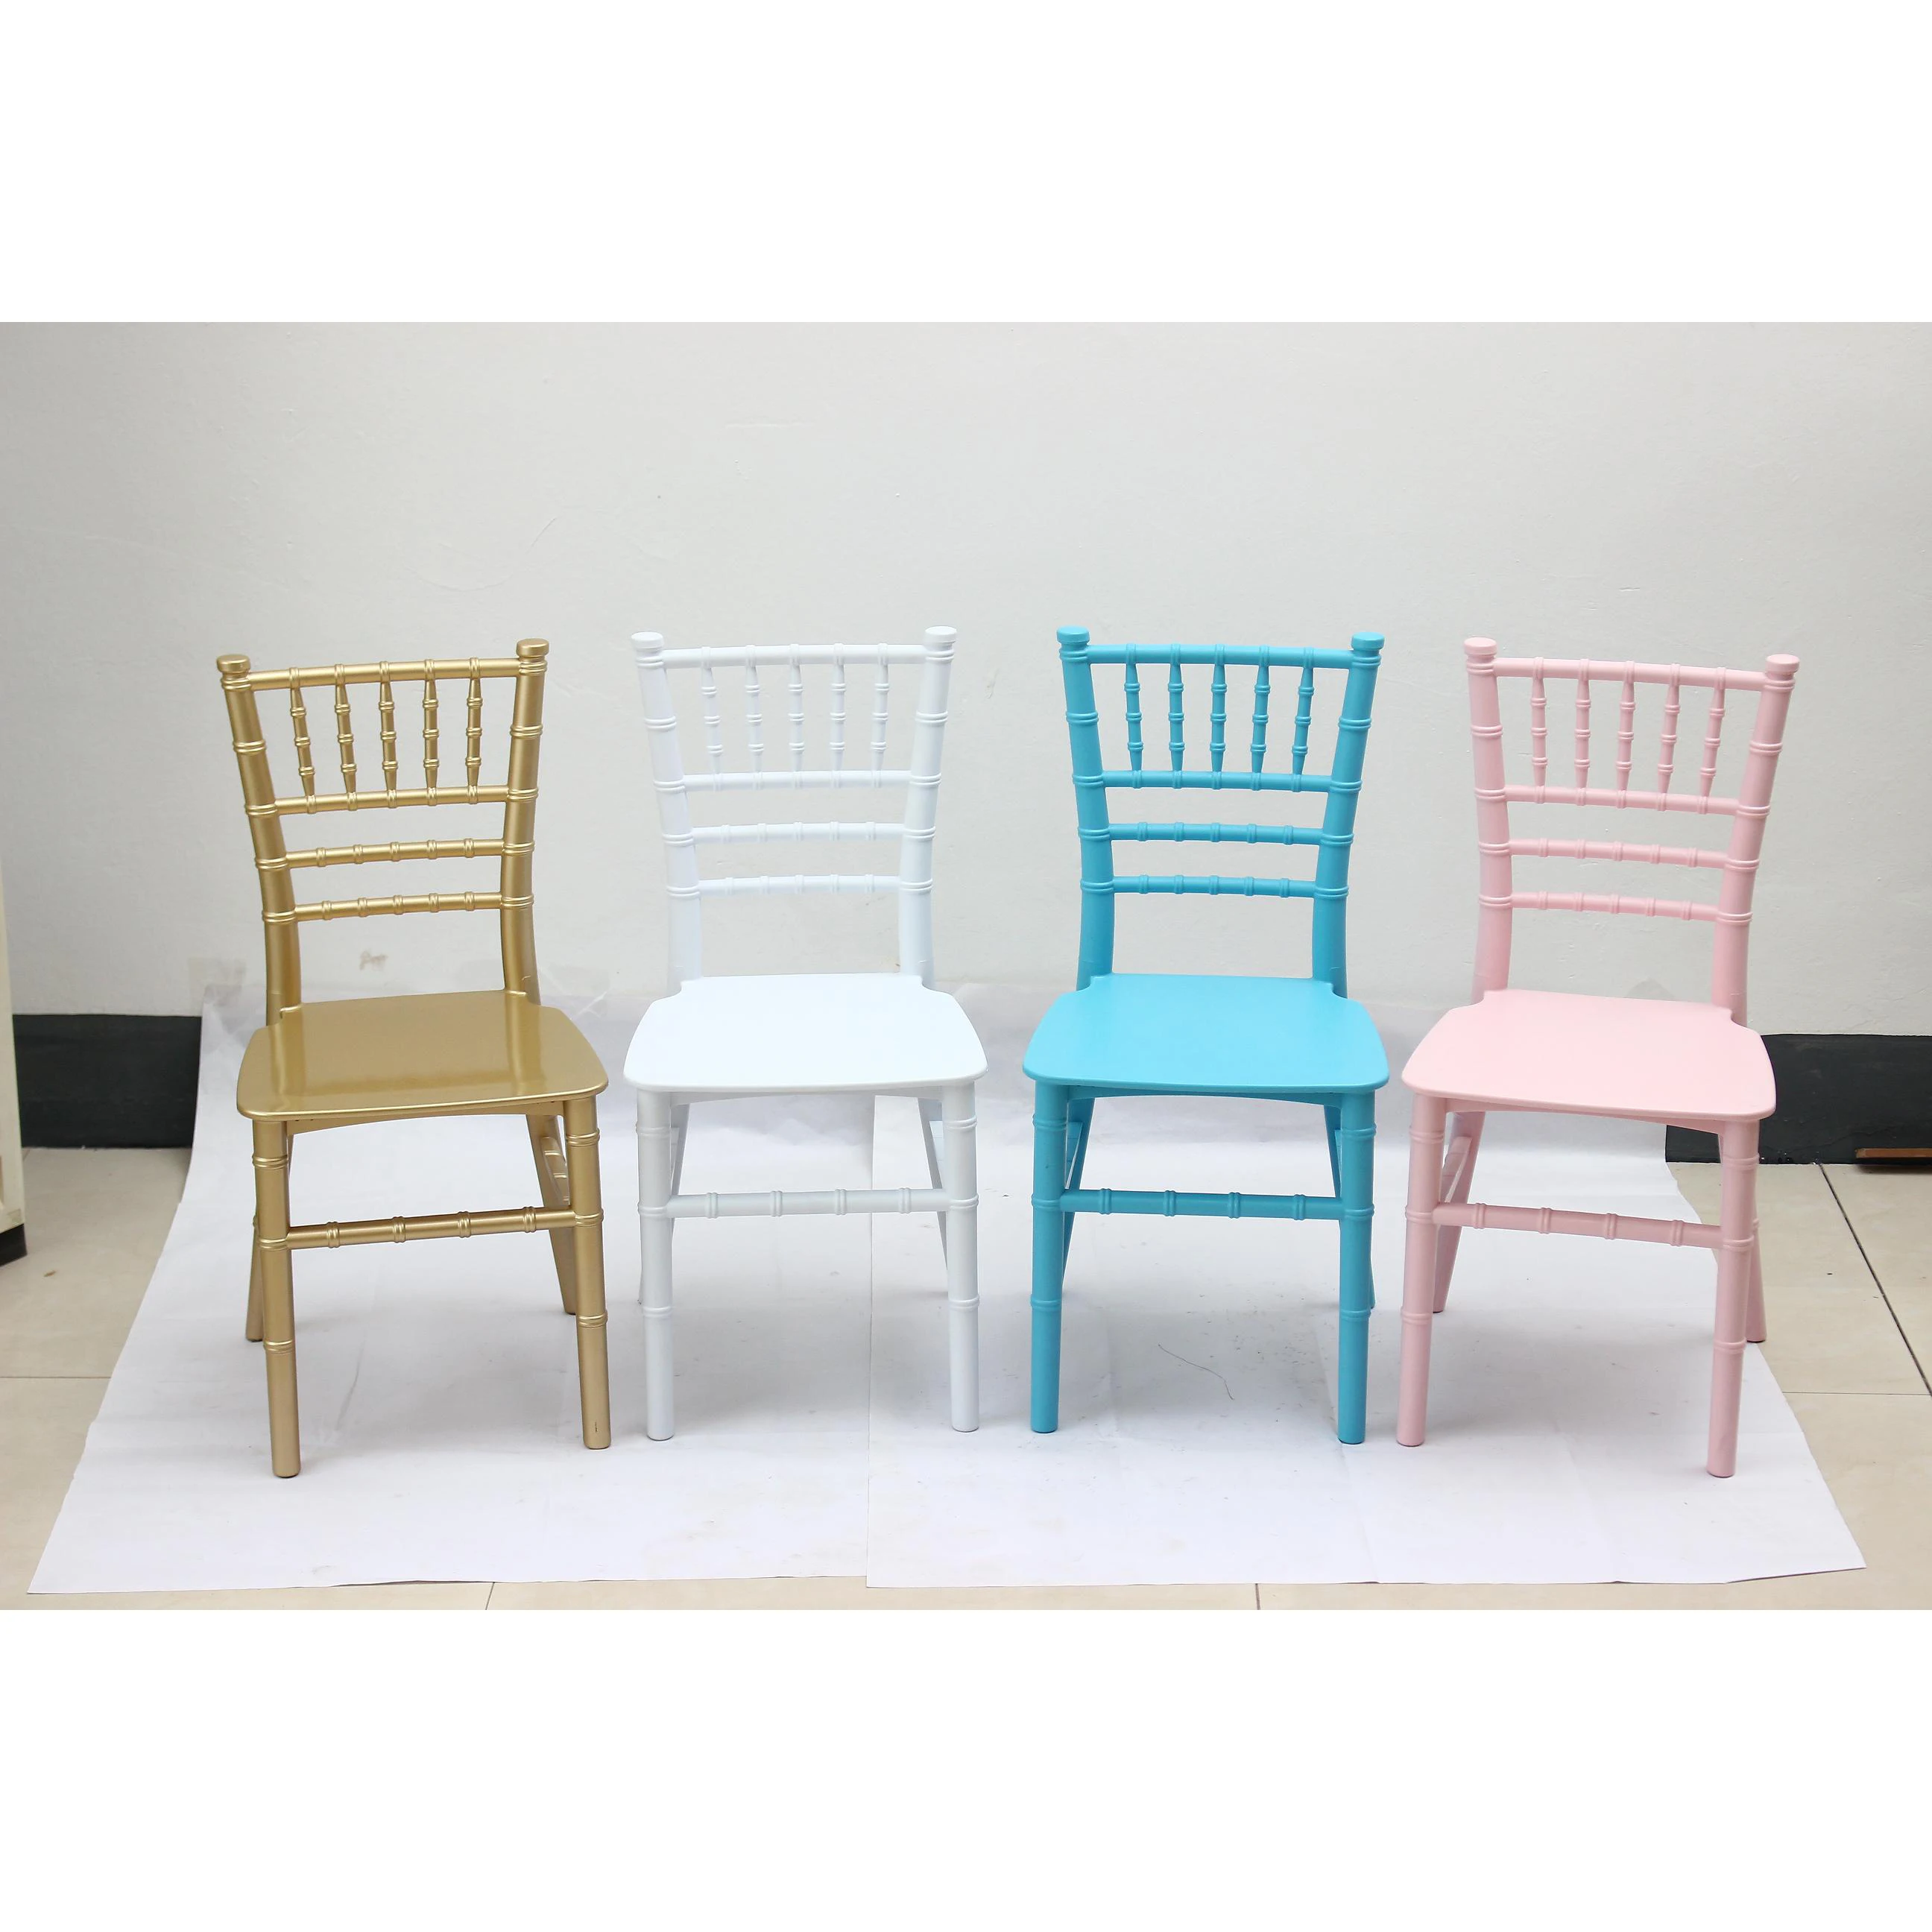 folding table and chairs for kids